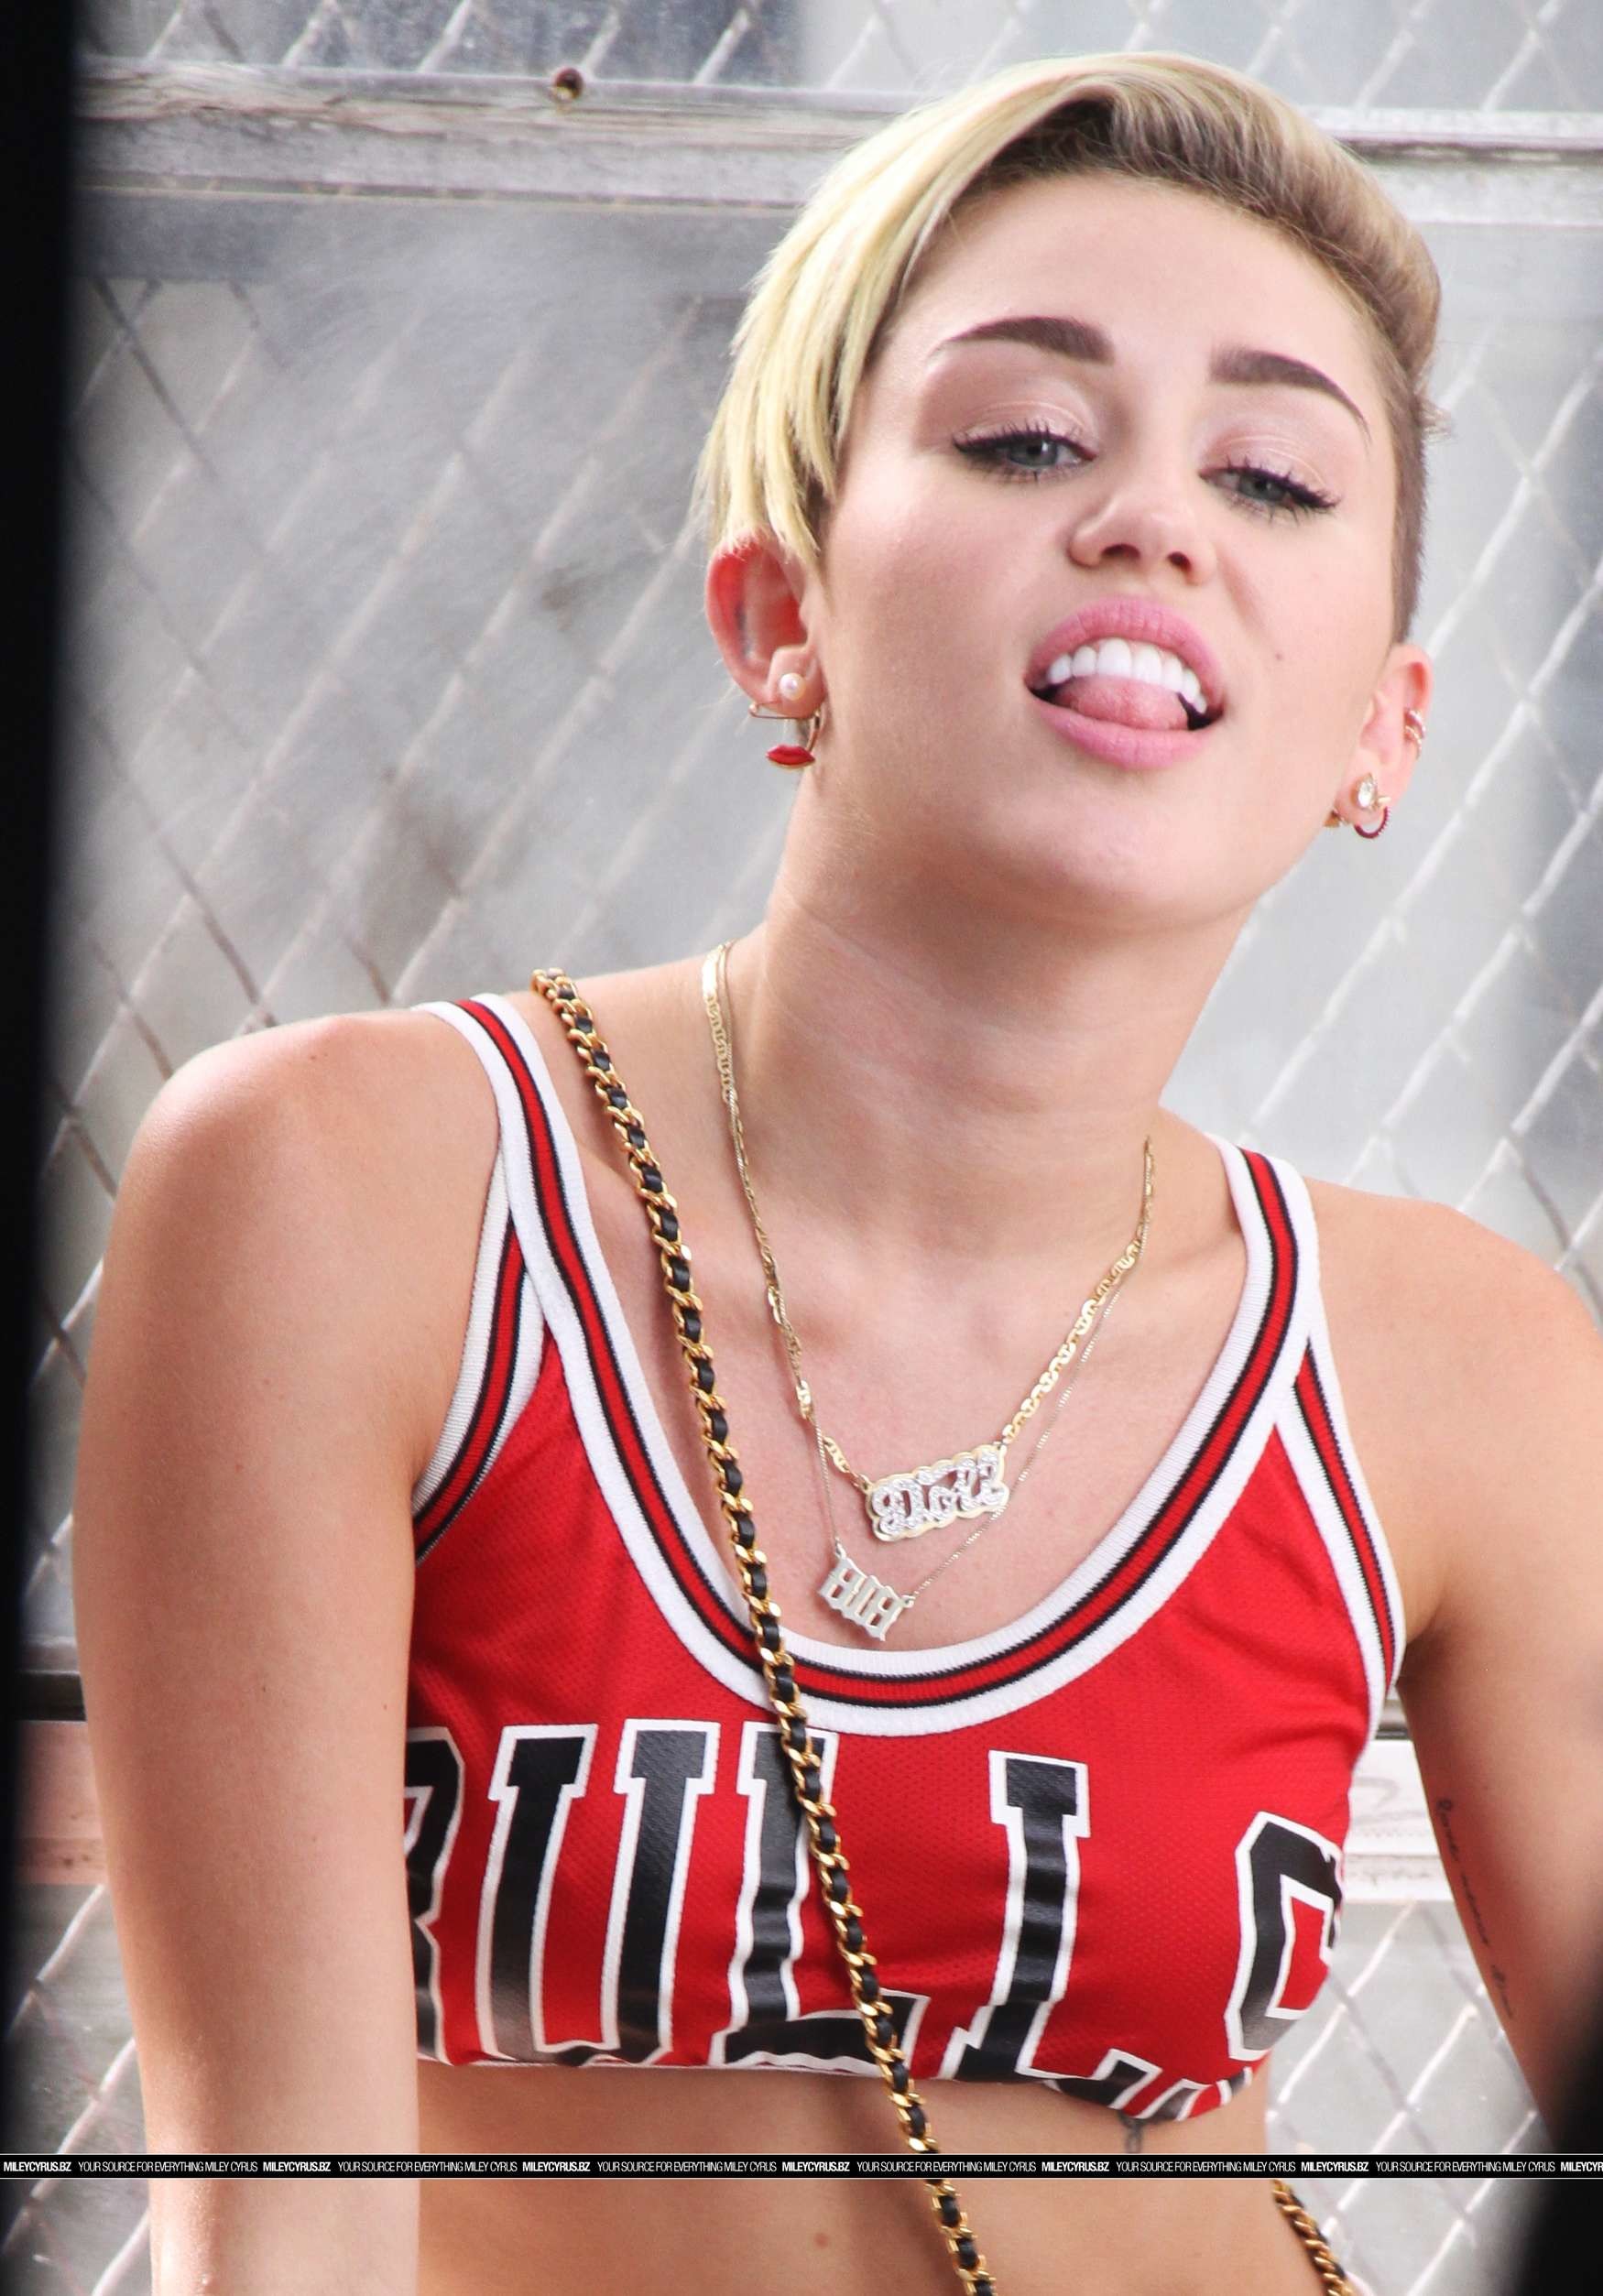 Miley Cyrus 23 Music Video Portraits 16 – Full Size